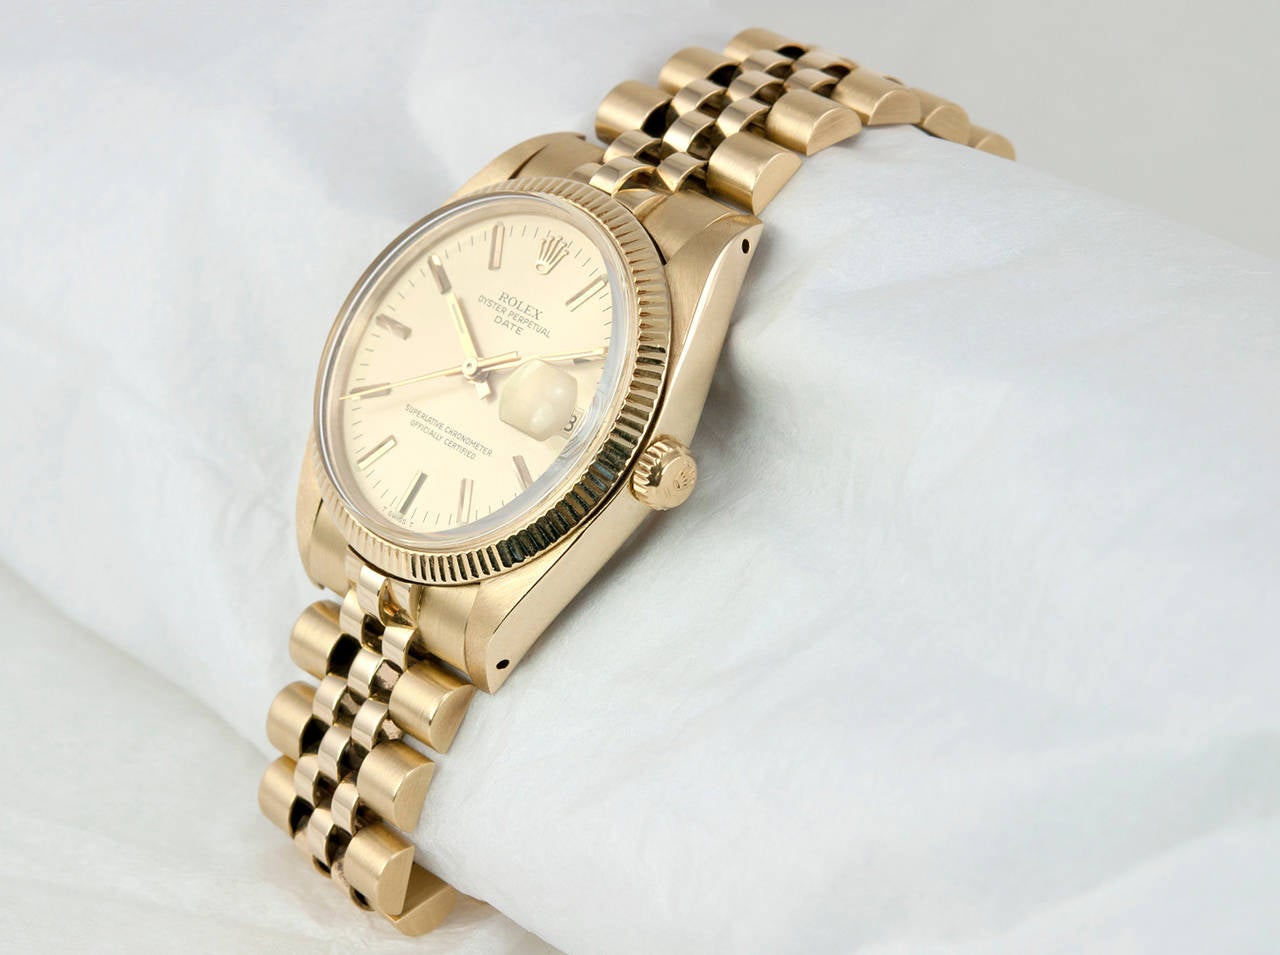 Rolex 14K yellow gold Date wristwatch, Ref. 1503, 1979. Champagne-color dial, plastic crystal, locking waterproof crown, fluted gold bezel, Jubilee bracelet. The case measures approximately 34mm in width.

This watch includes a one year warranty